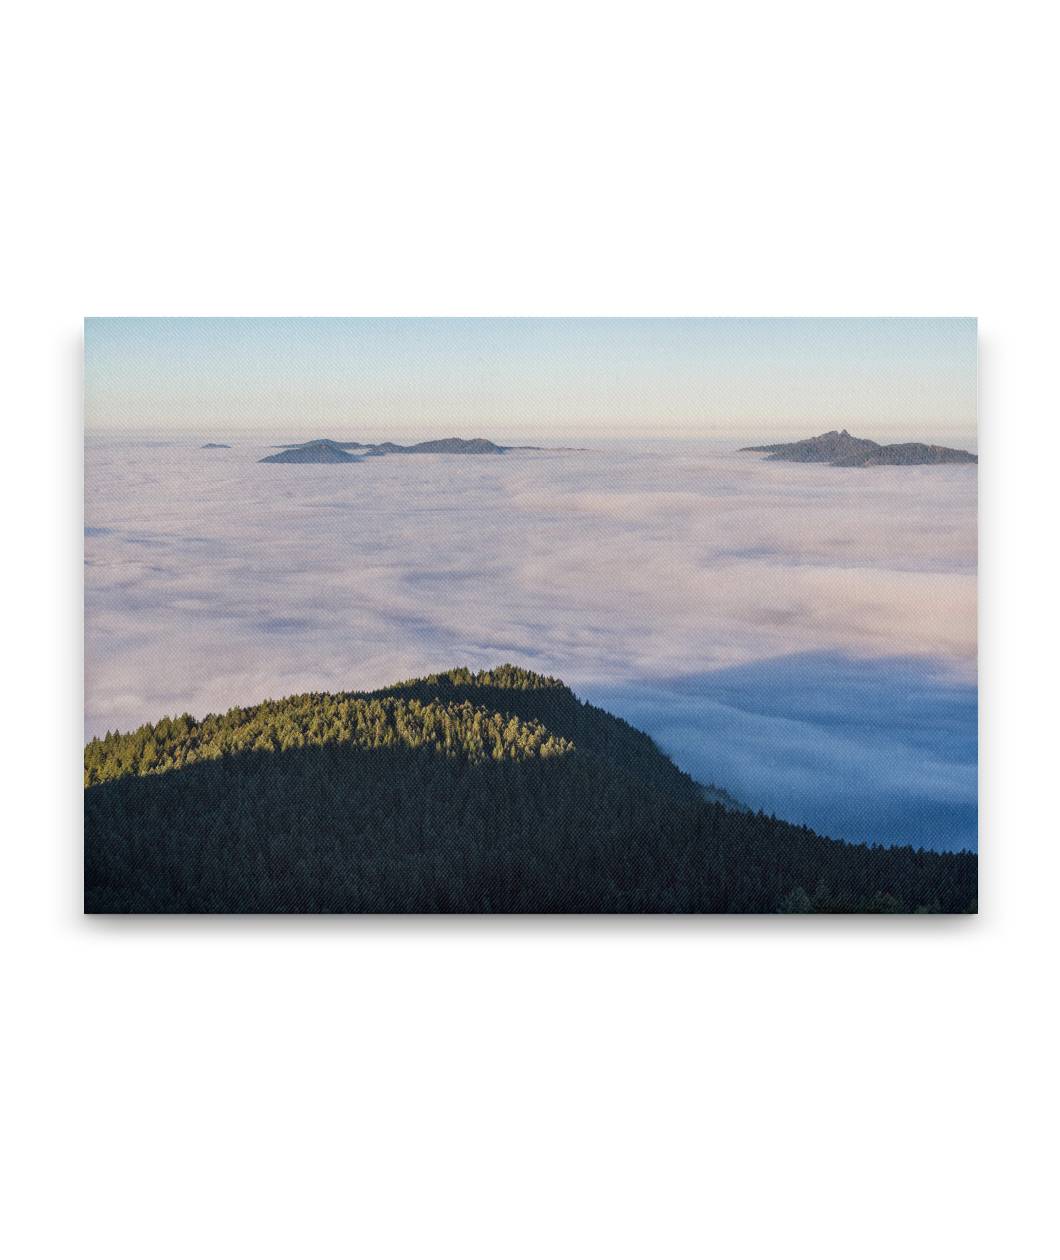 Marine Layer Over West Cascades From Carpenter Mtn Fire Lookout, Willamette Forest, Oregon